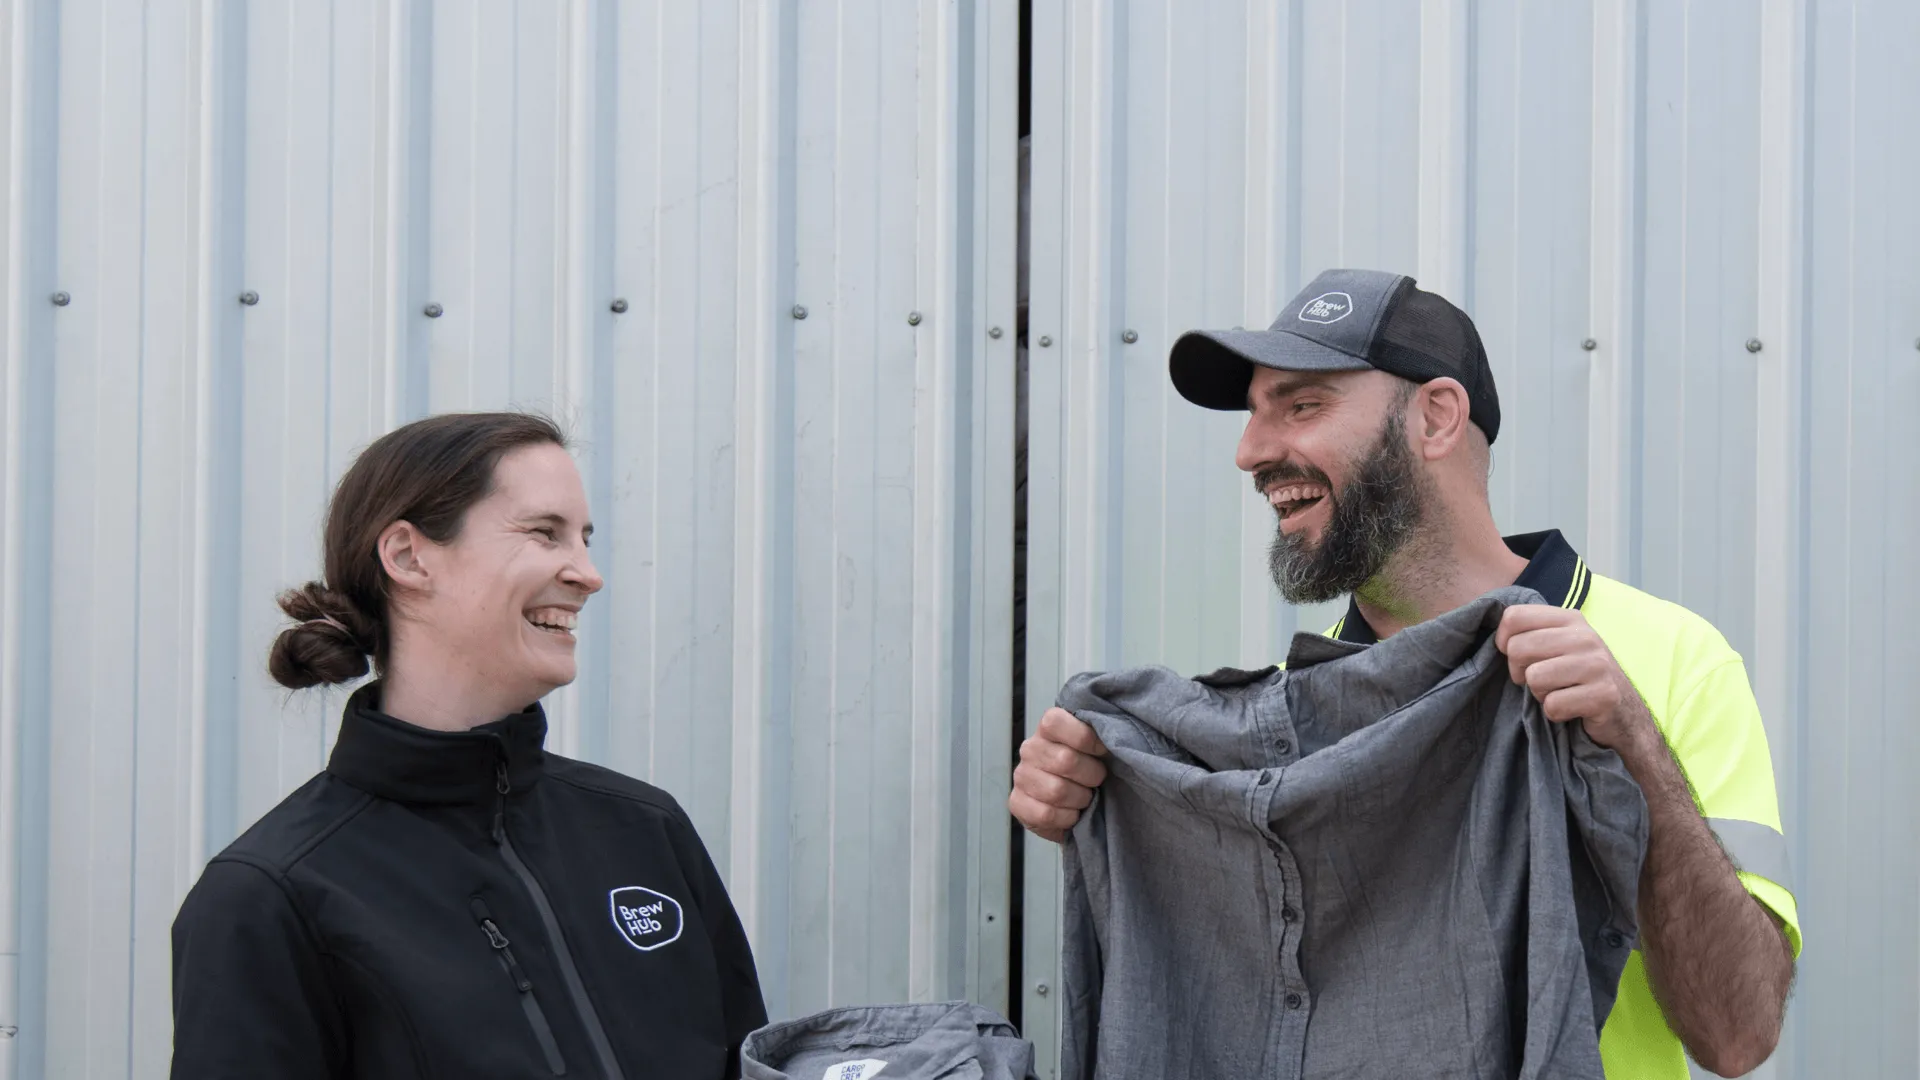 A BrewHub employee presenting uniforms to a worker as part of their uniform donation program